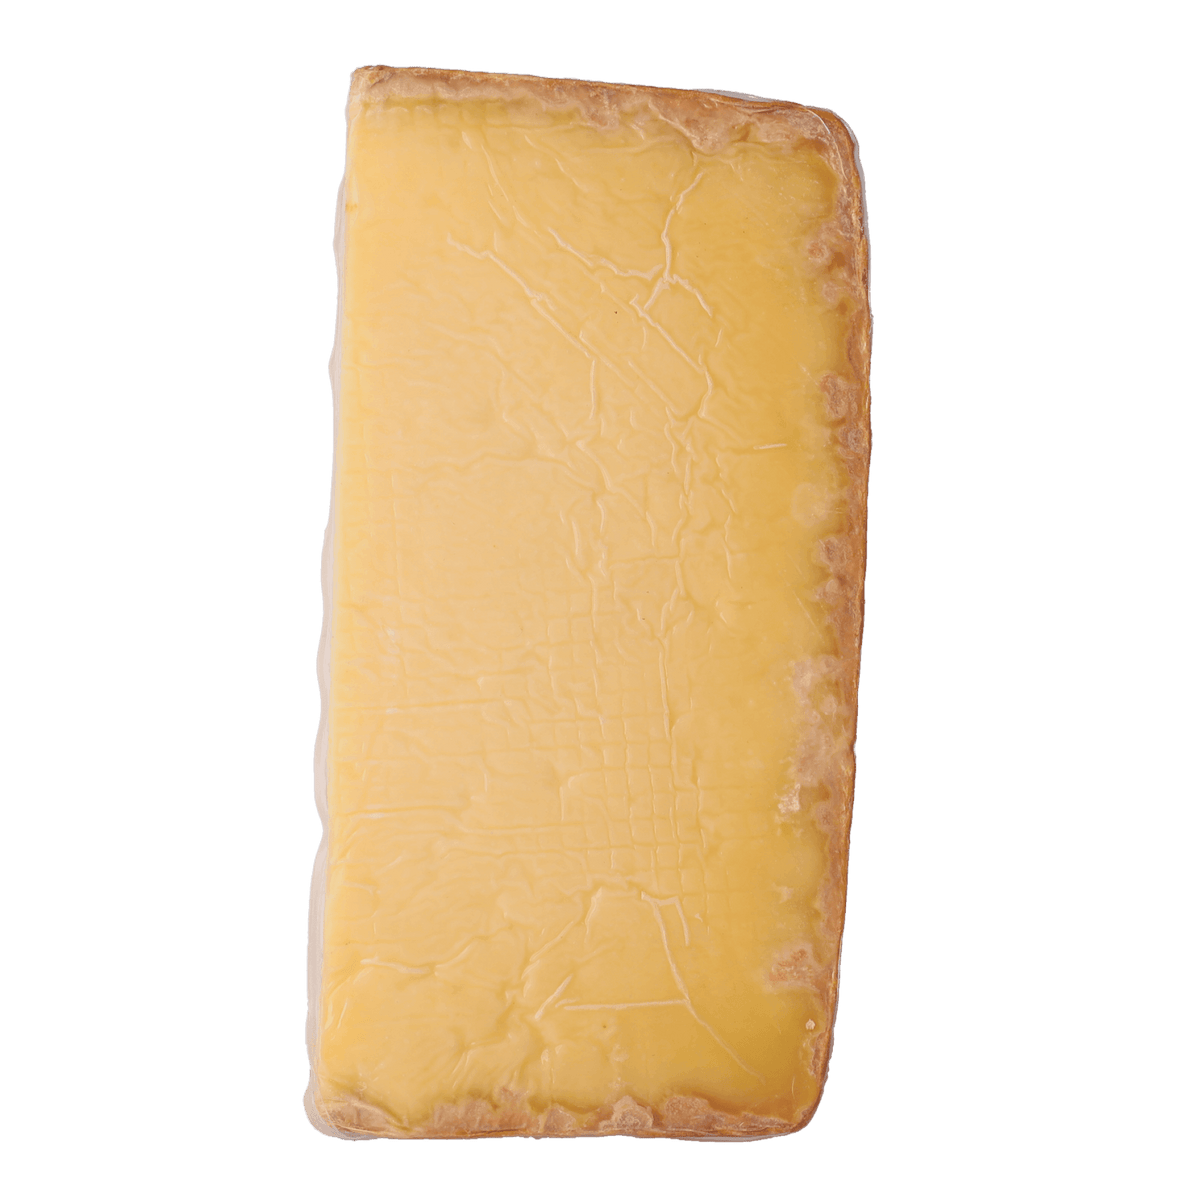 What's the White Stuff on Cheese?